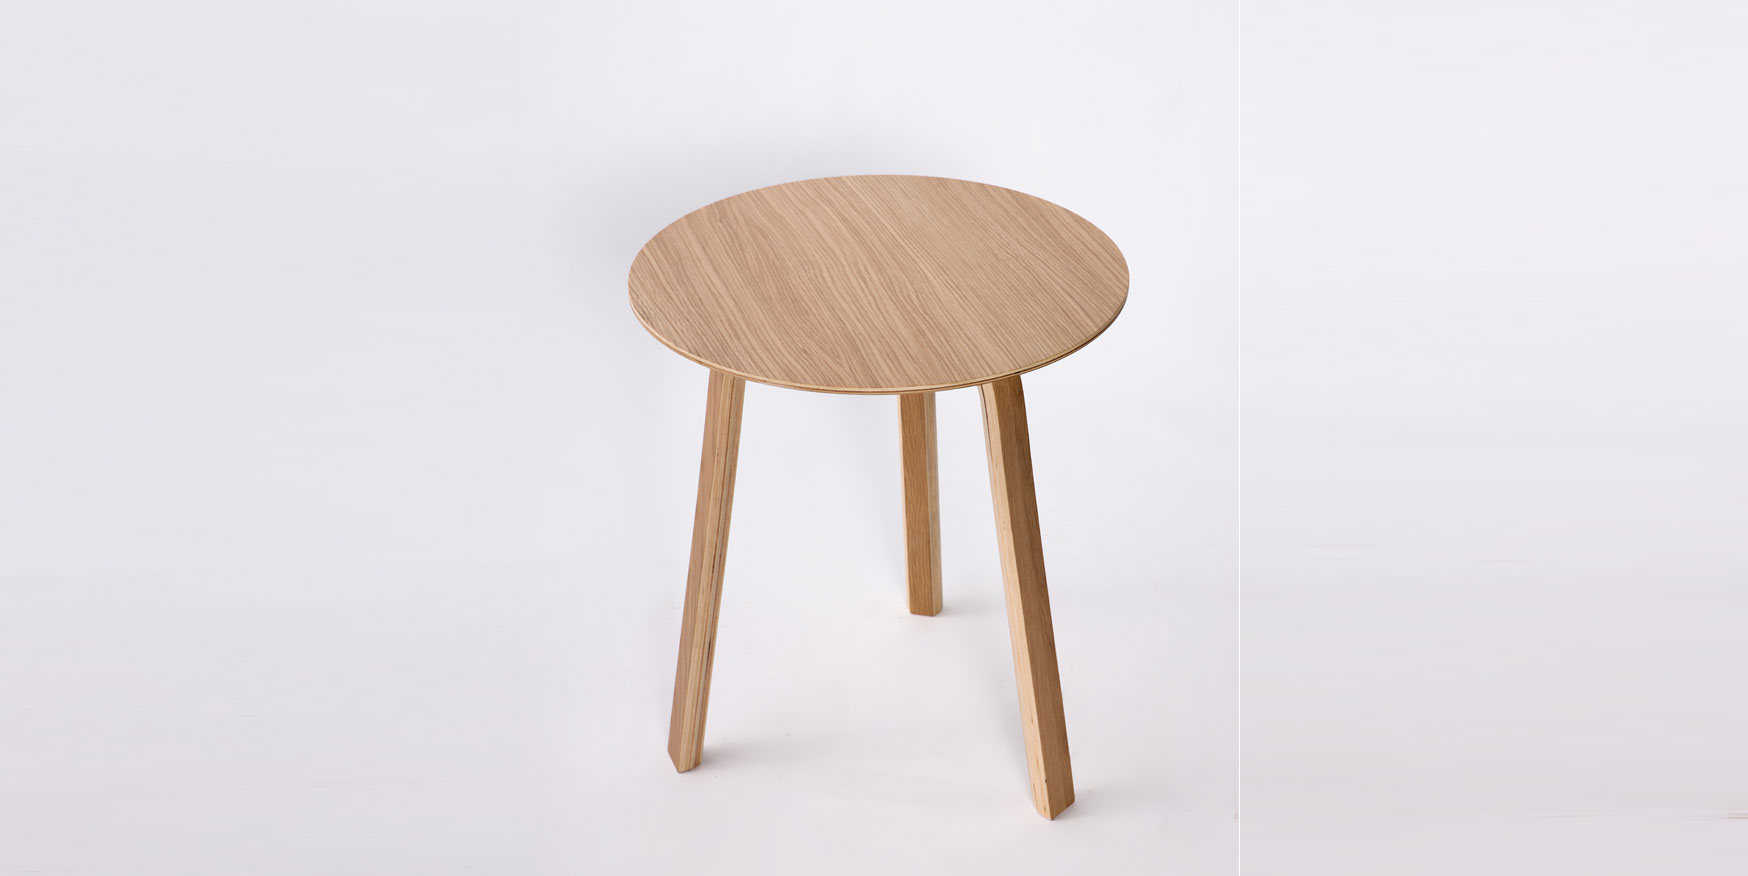 YT2-D/X End Table Modern Nordic Wooden End Table Plywood Table Bentwood Table